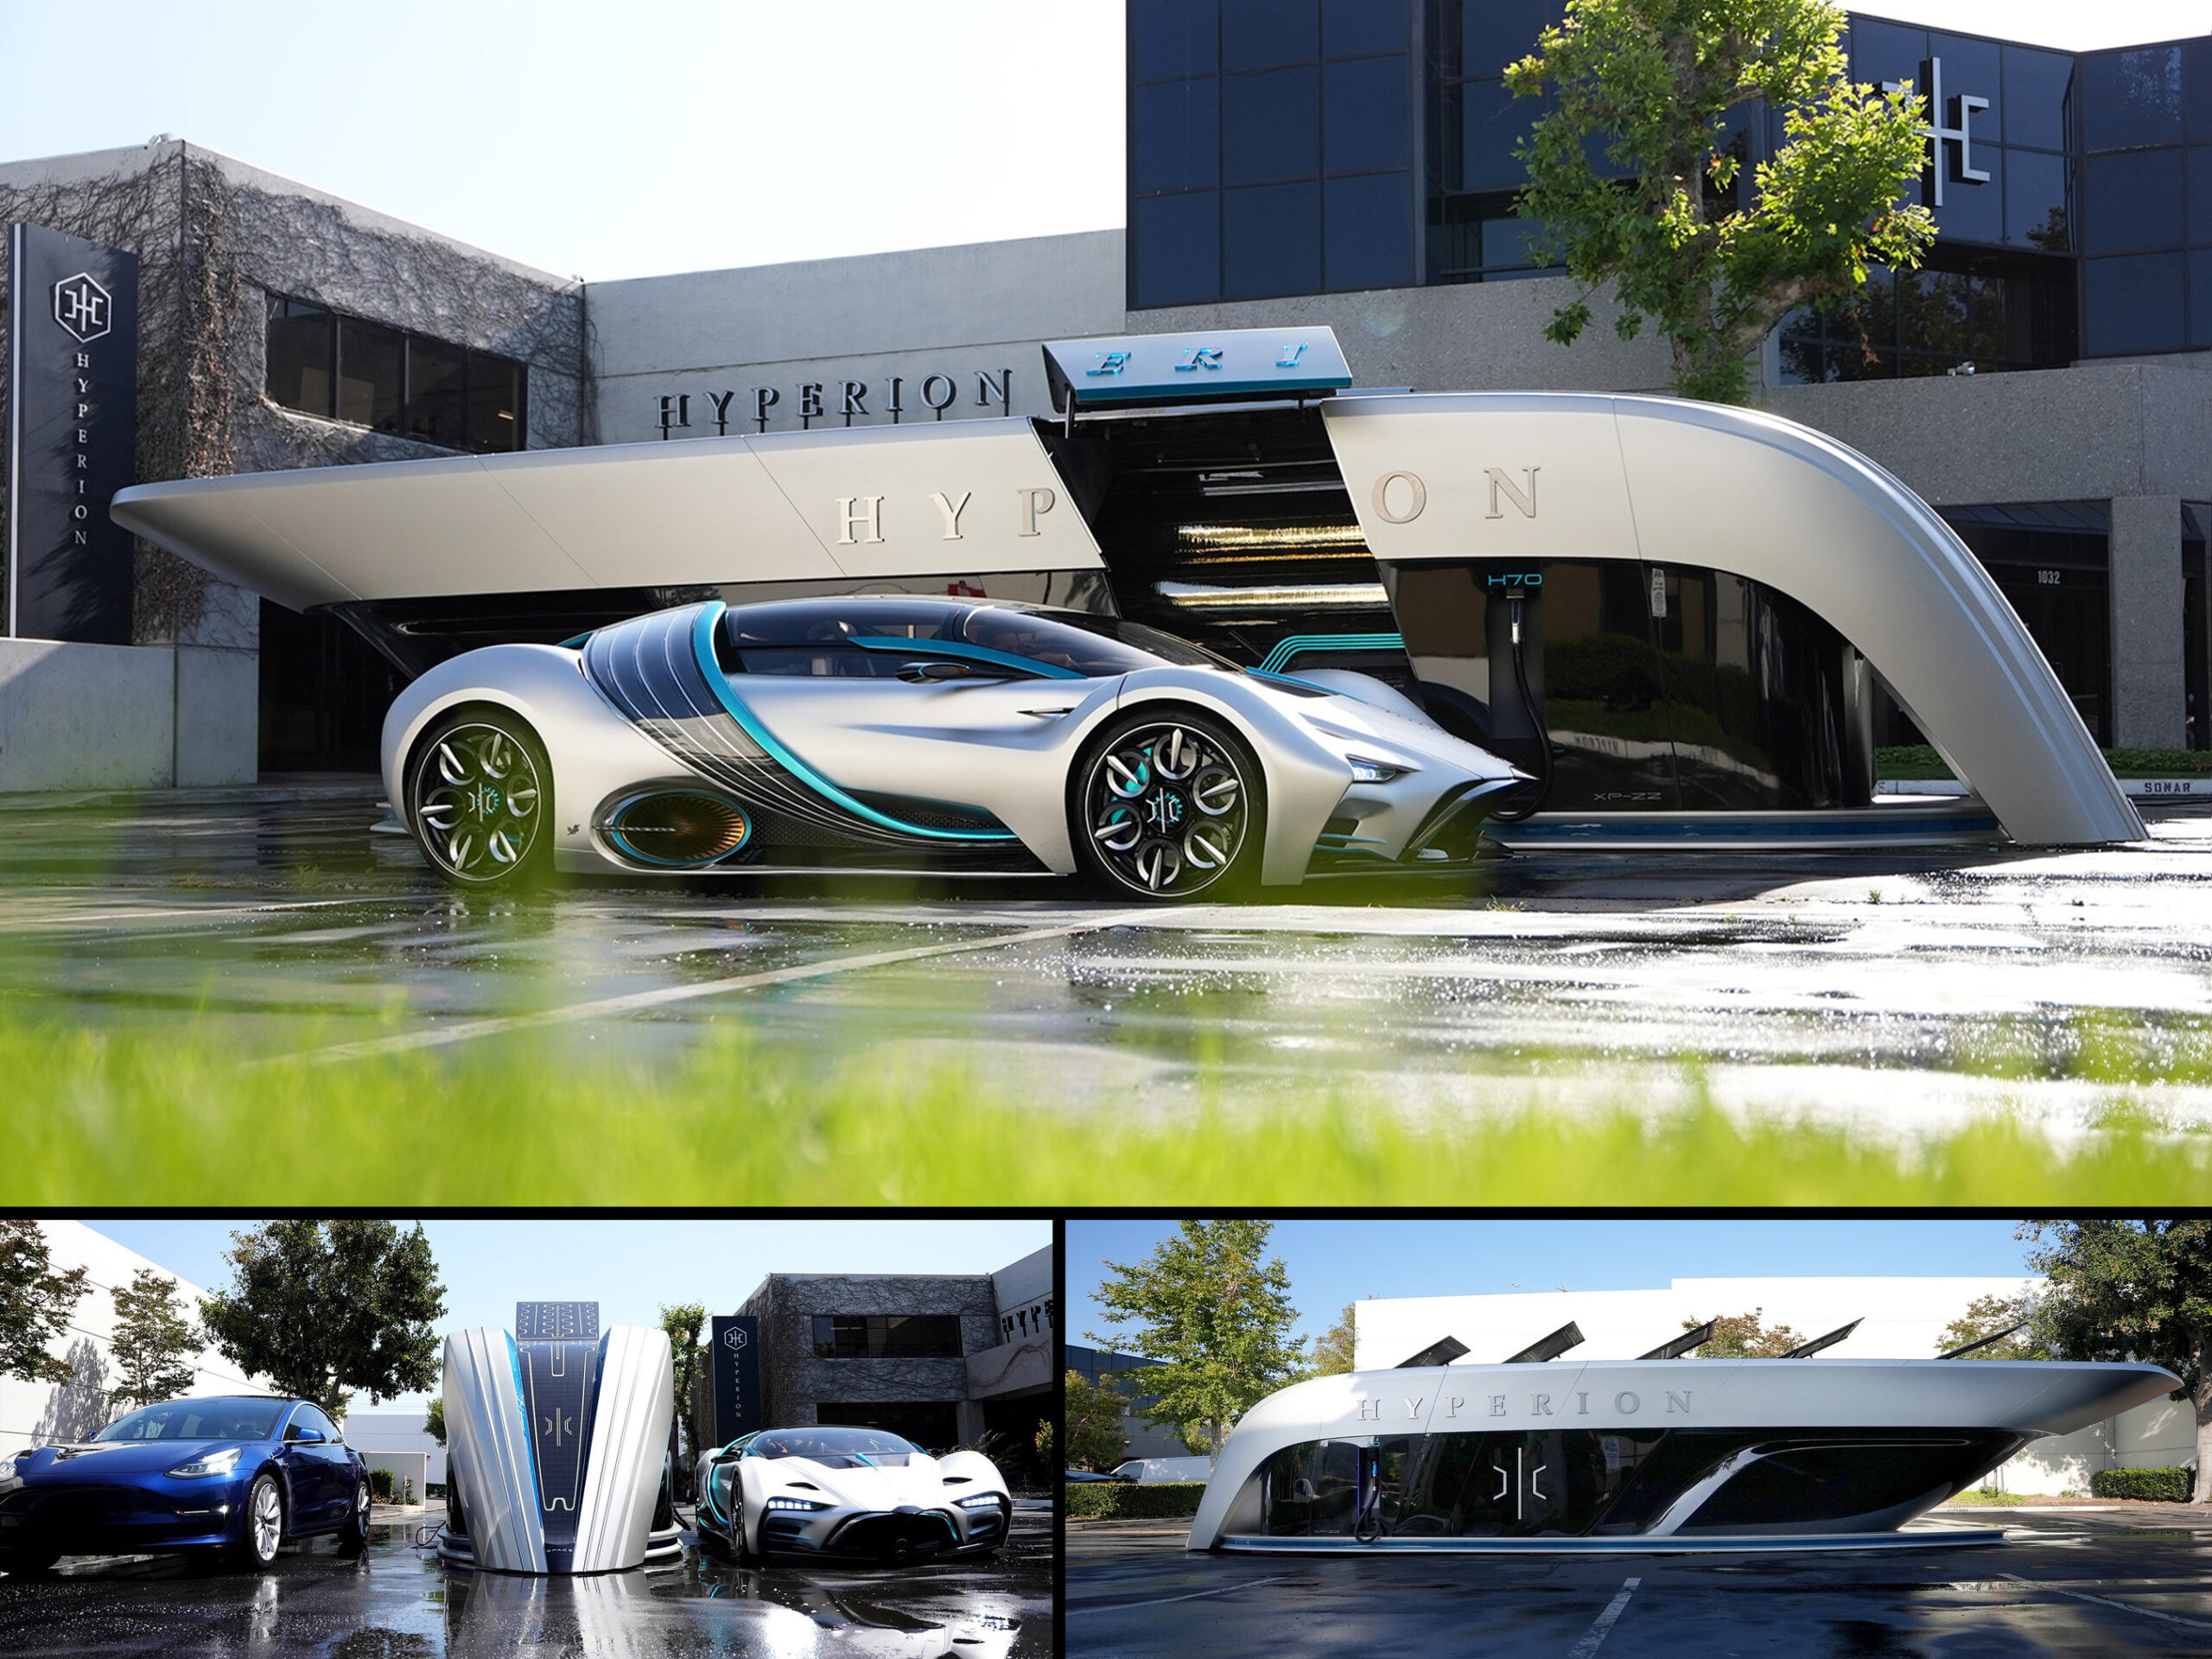 Hyperion car at Hyperion headquarters